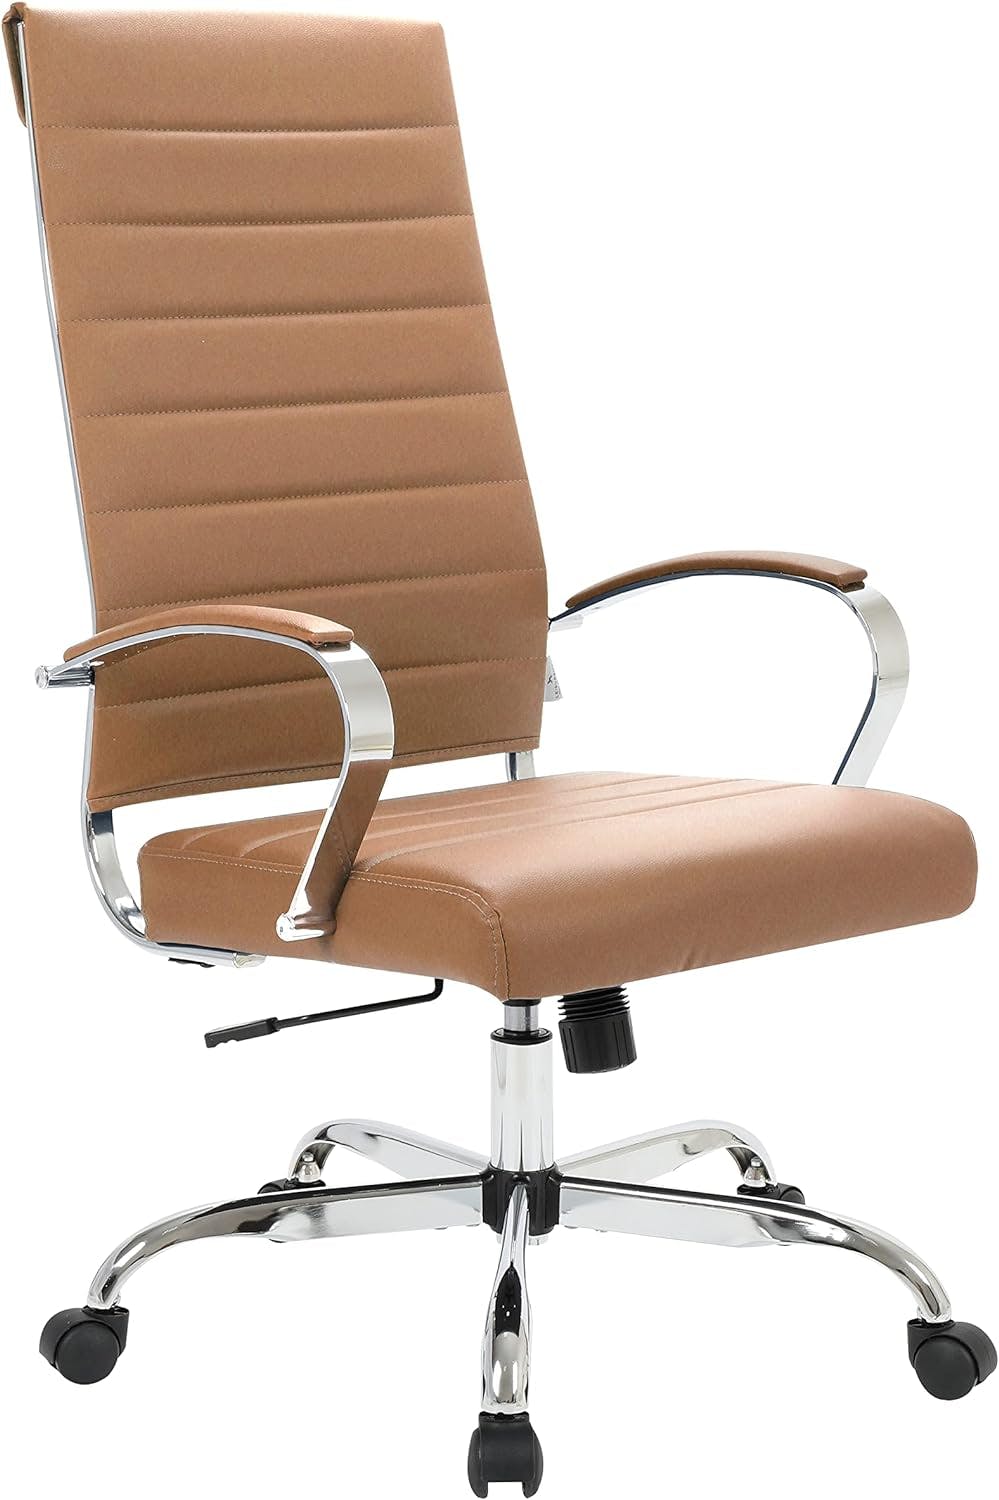 Elegant High-Back Swivel Office Chair in Luxurious Brown Leather